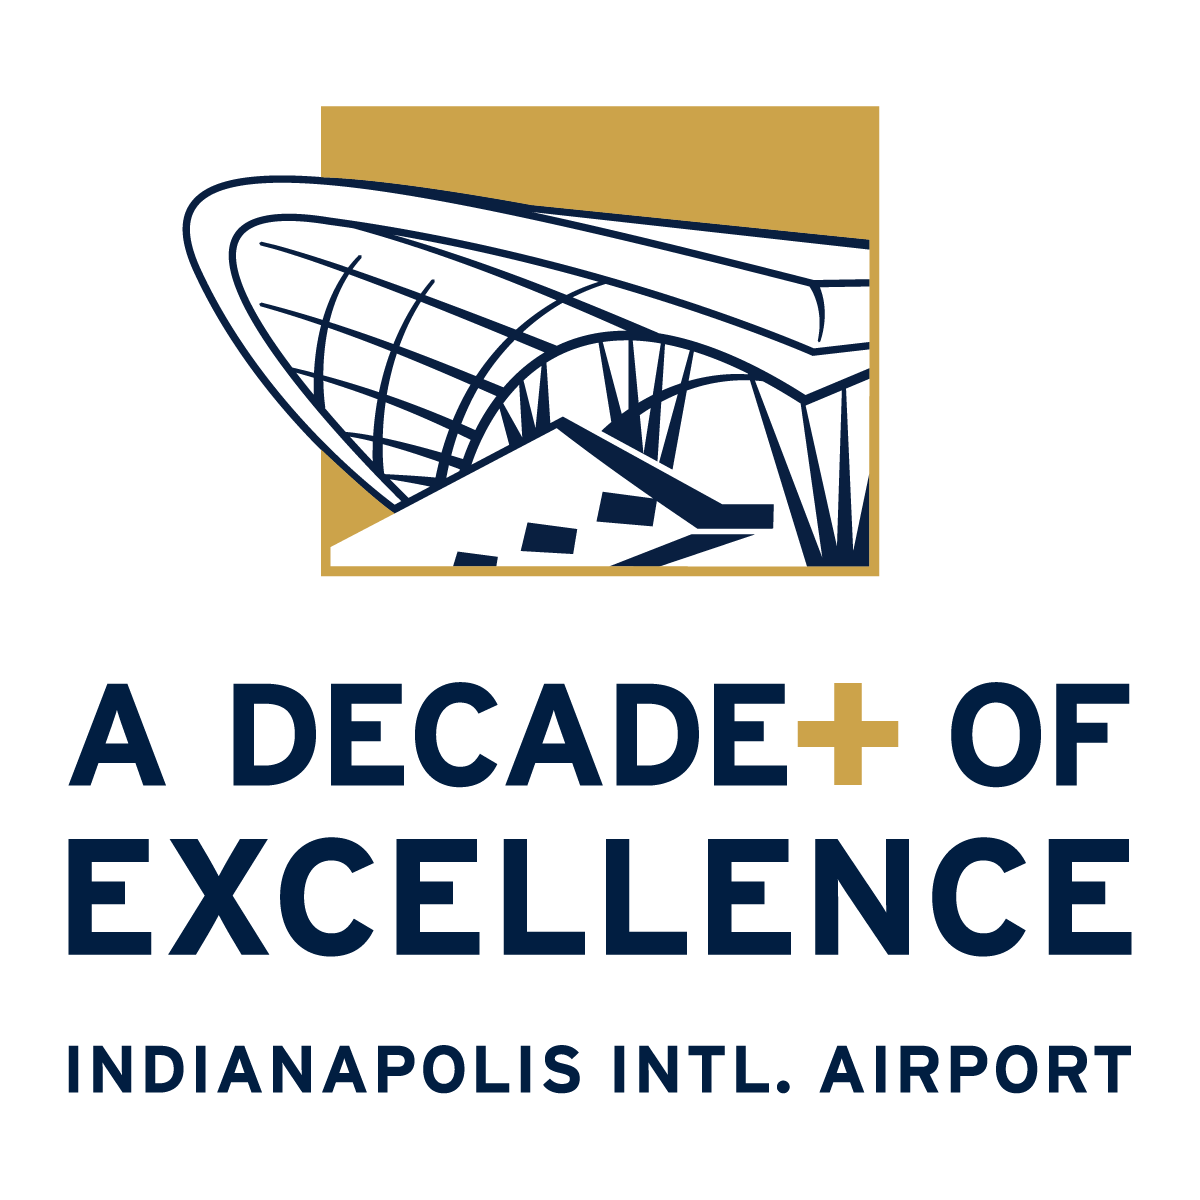 J. Indianapolis Airport Authority (Tier 3)